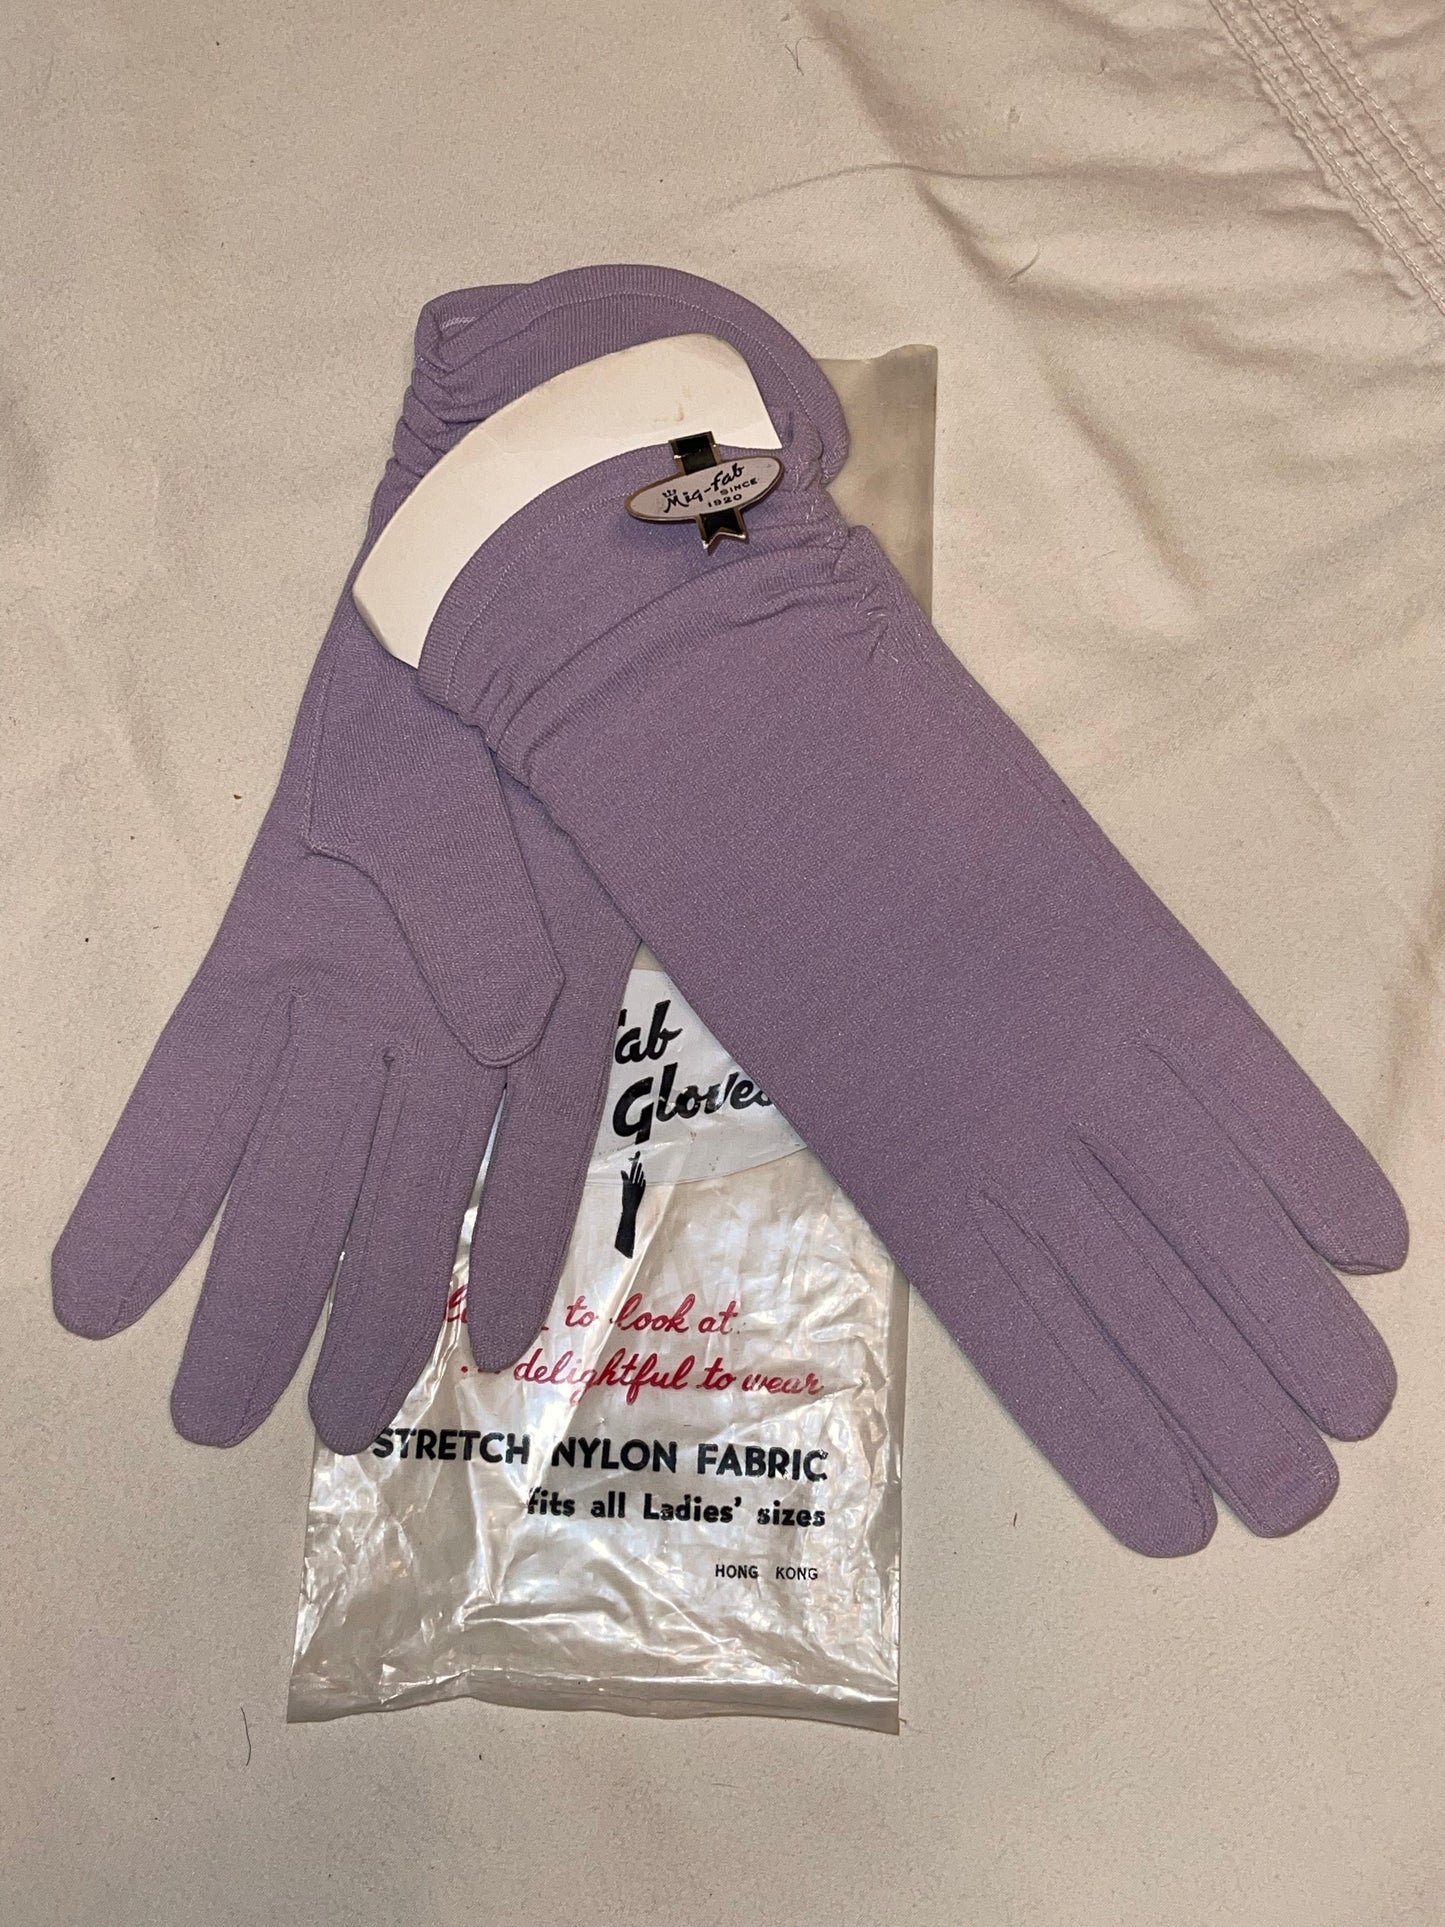 Mig-fab Lilac Colored Gloves